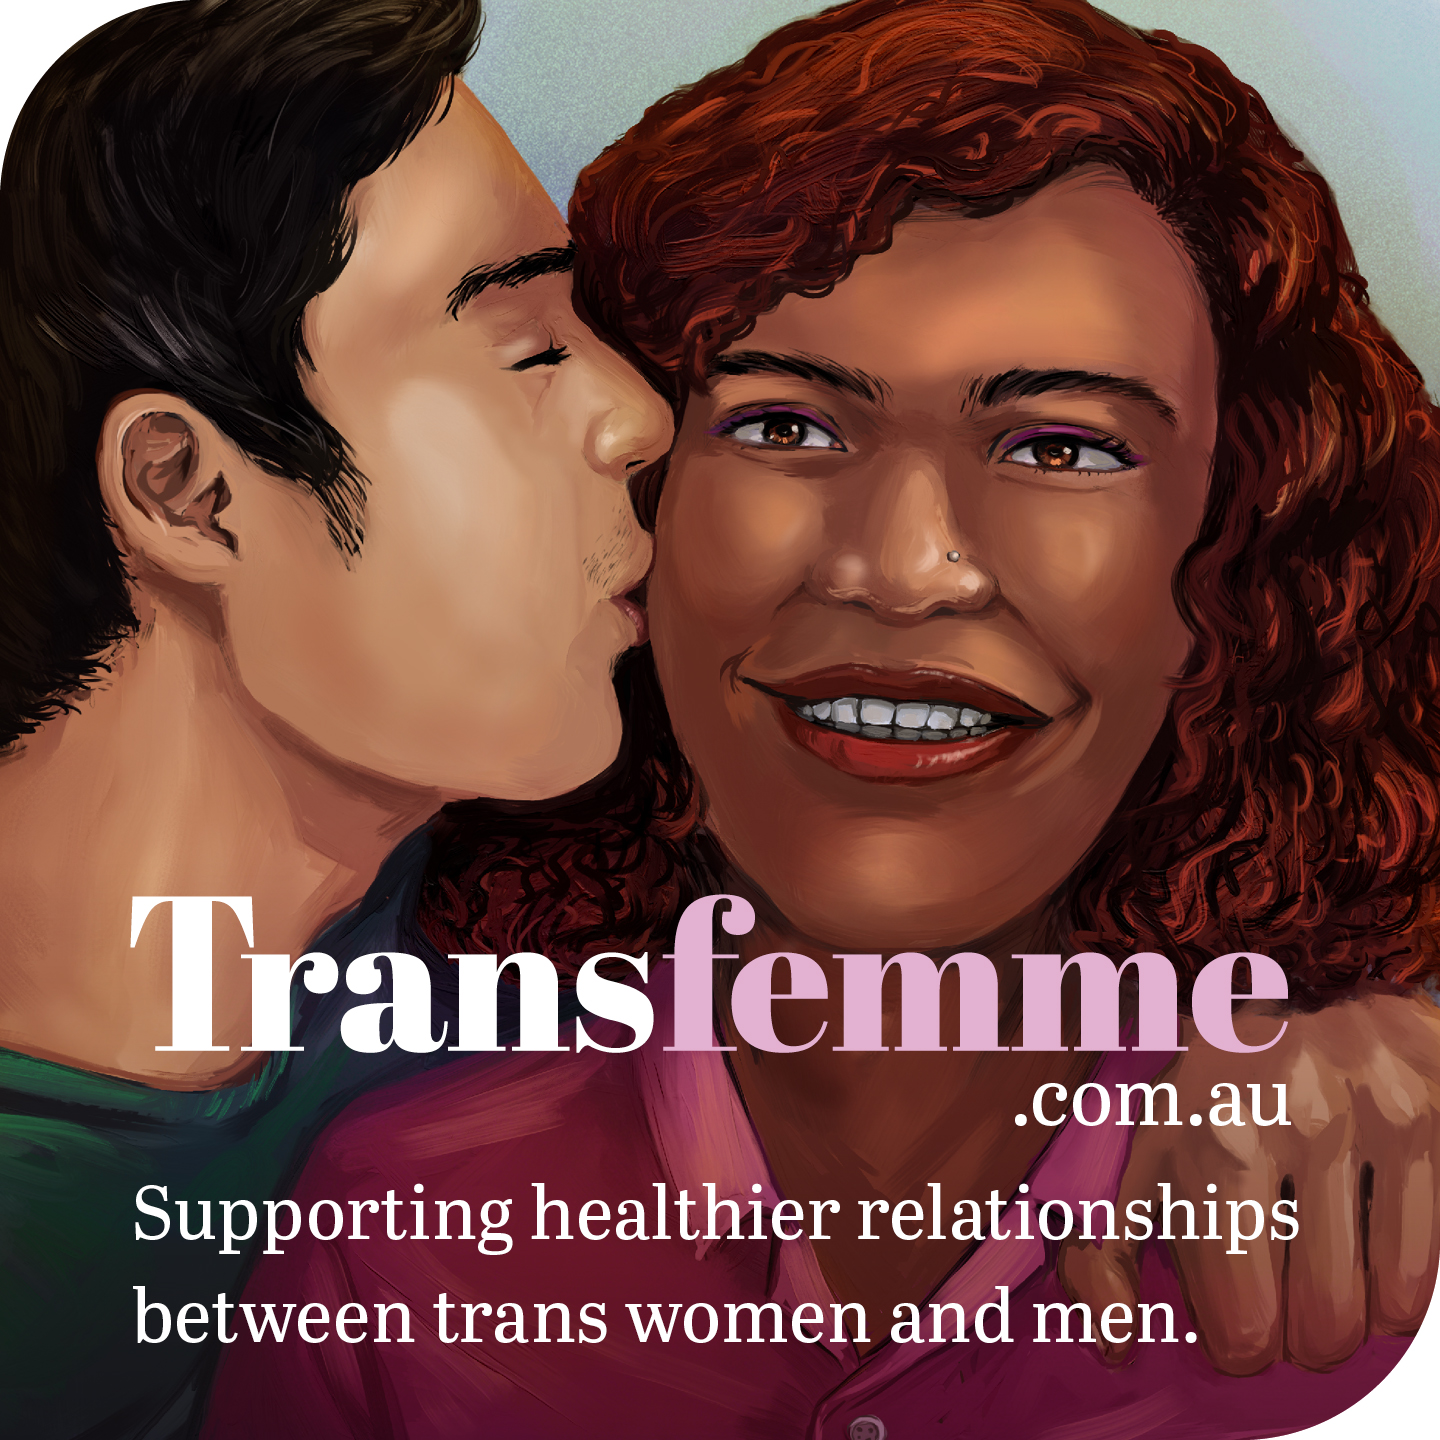 Image is of a trans woman of colour smiling happily while her cute partner, who has light skin, gives her a beautiful kiss on the cheek. He has his arm around her, she's wearing a deep pink shirt with a hint of matching eyeshadow. The text reads "Transfemme.com.au : Supporting healthier relationships between trans women and men"